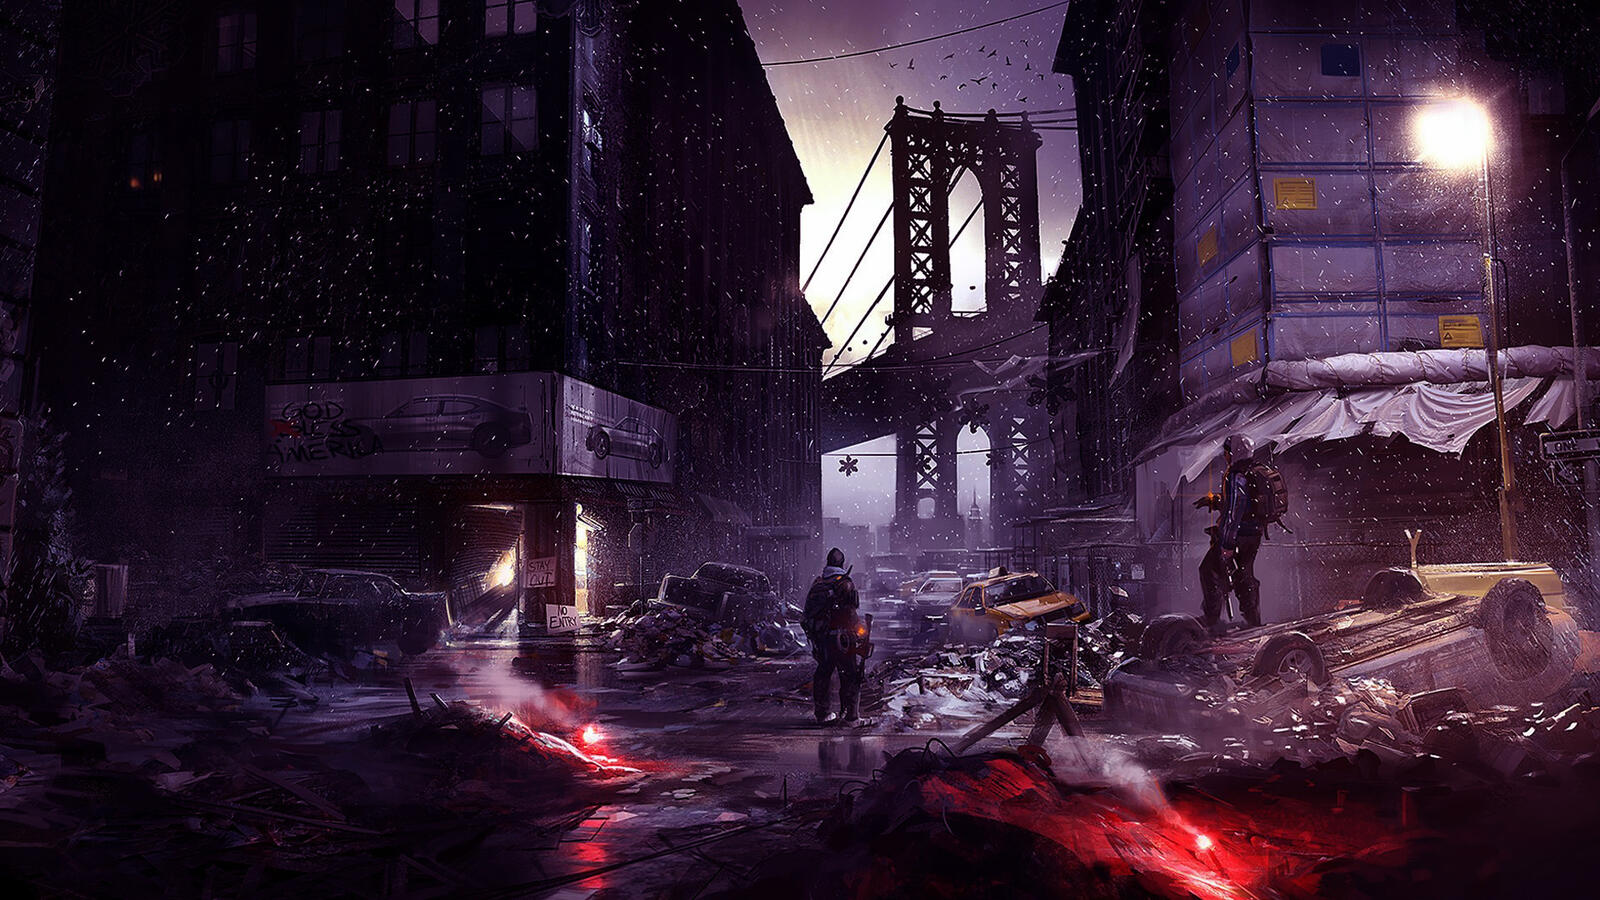 Wallpapers city Tom Clancys The Division PS4 games on the desktop